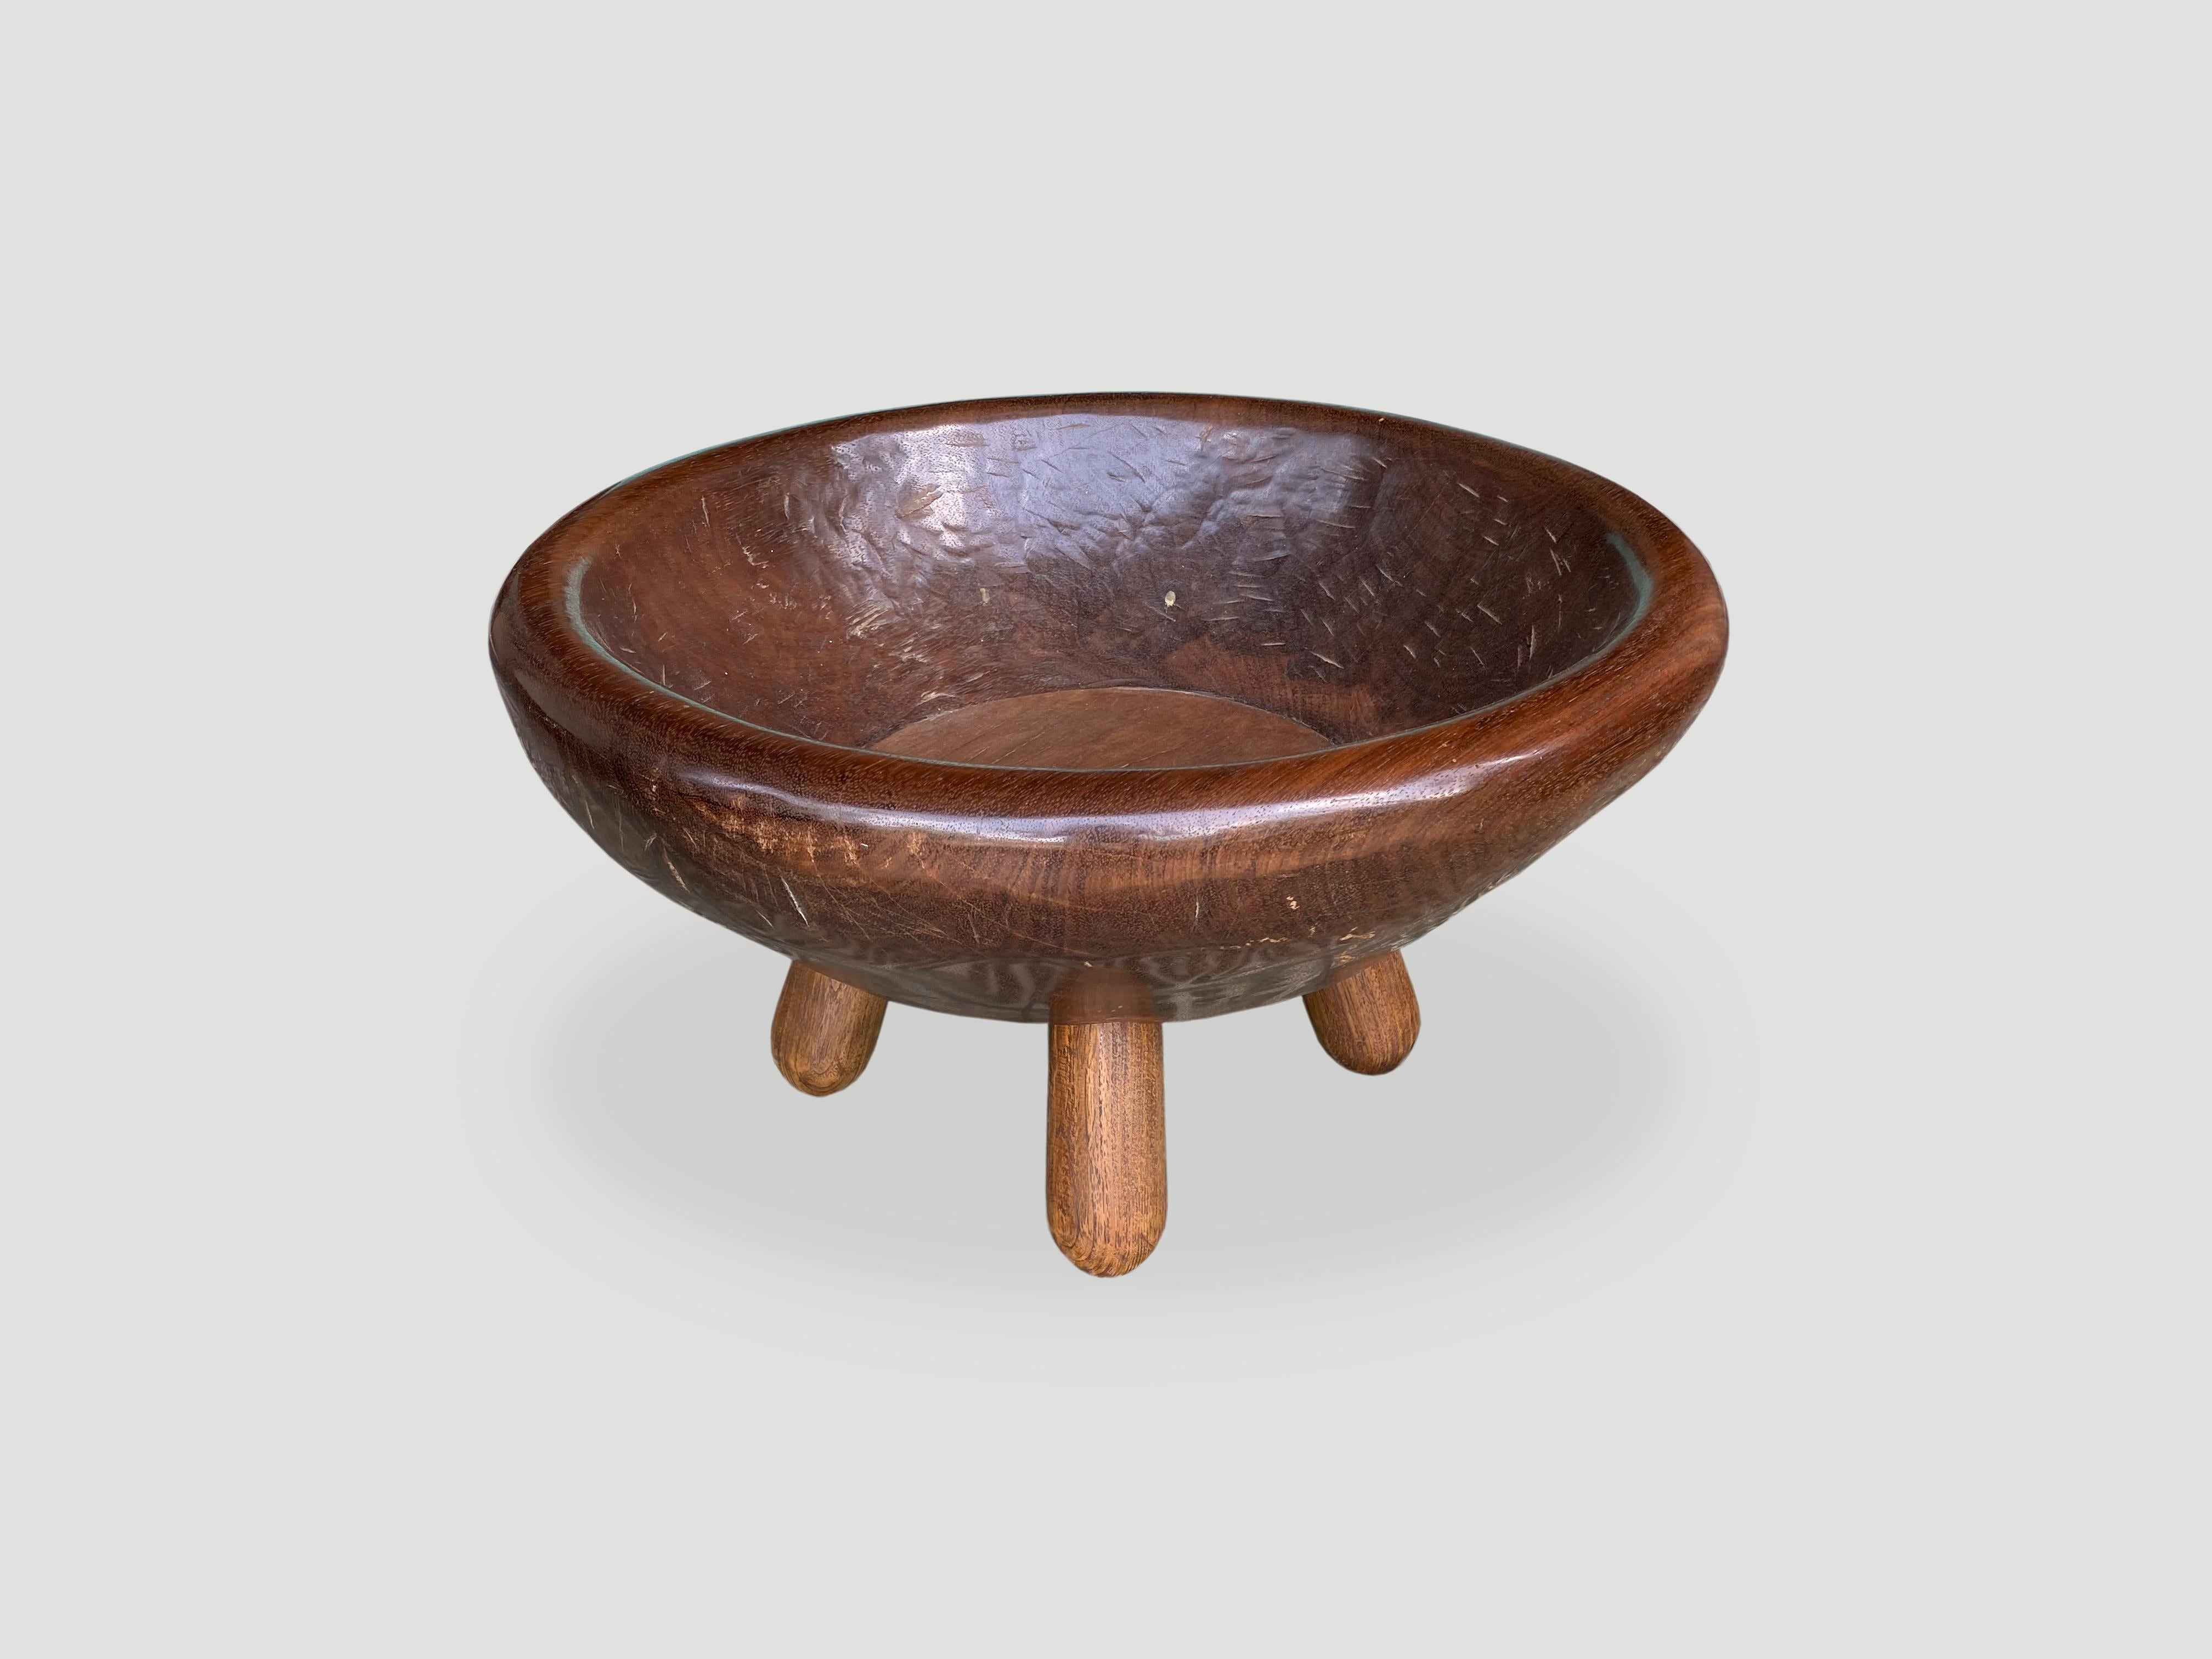 Introducing the midcentury Couture Collection new to 2021. Taken from my finest collection, a beautiful century old merbau wood bowl from Sumatra with stunning patina. We added midcentury style rounded teak legs. Perfect in a bathroom or spa for